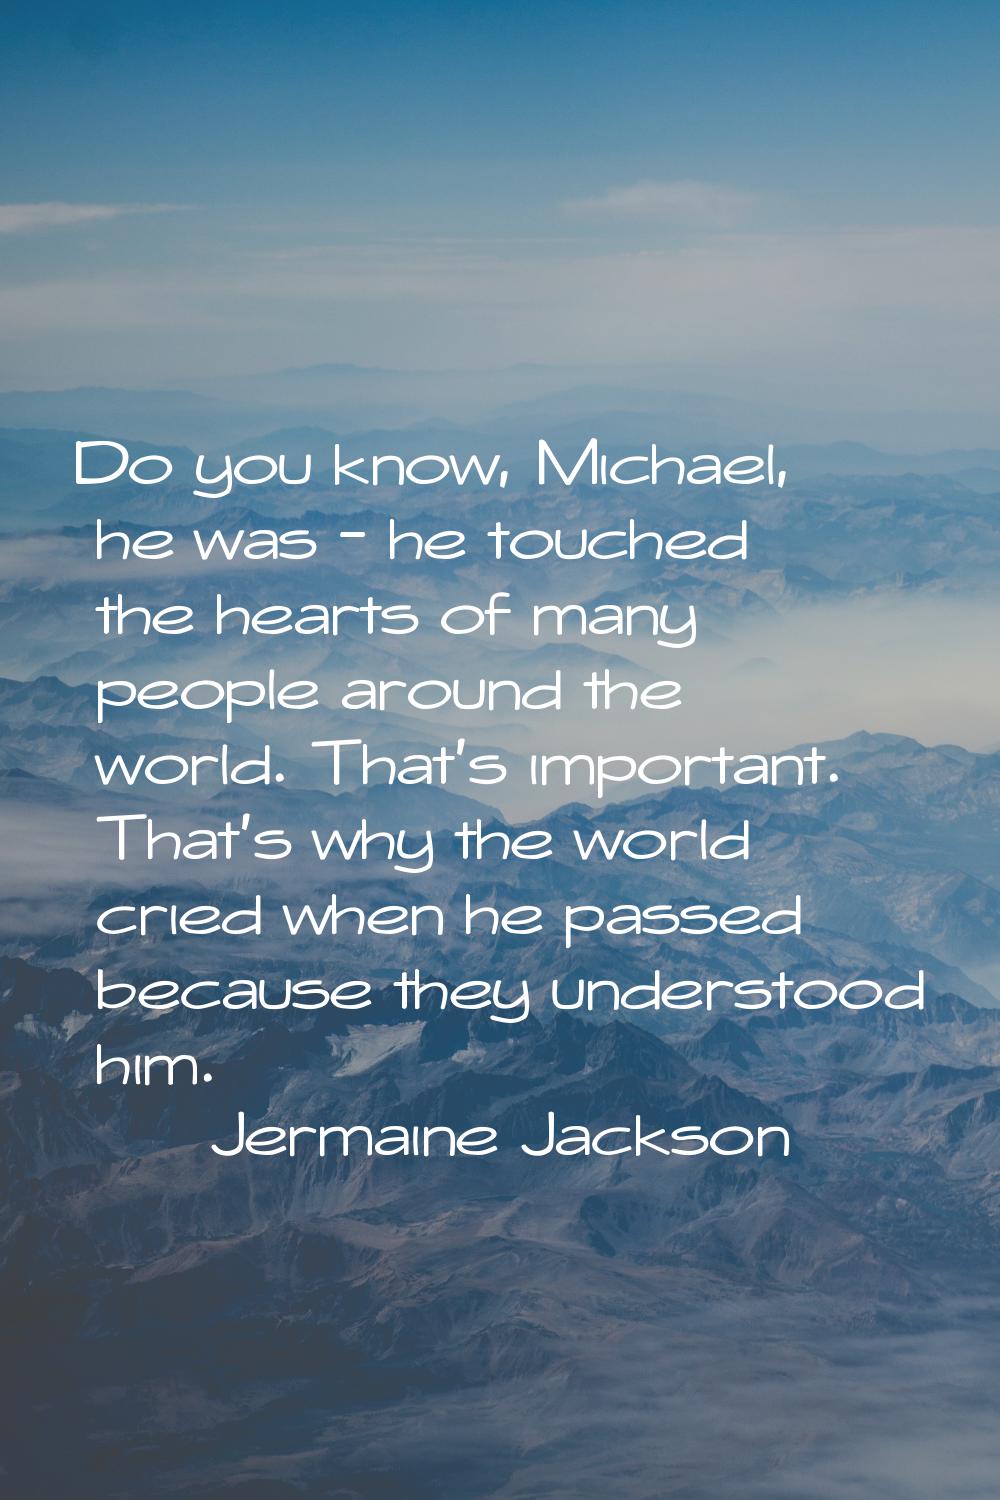 Do you know, Michael, he was - he touched the hearts of many people around the world. That's import